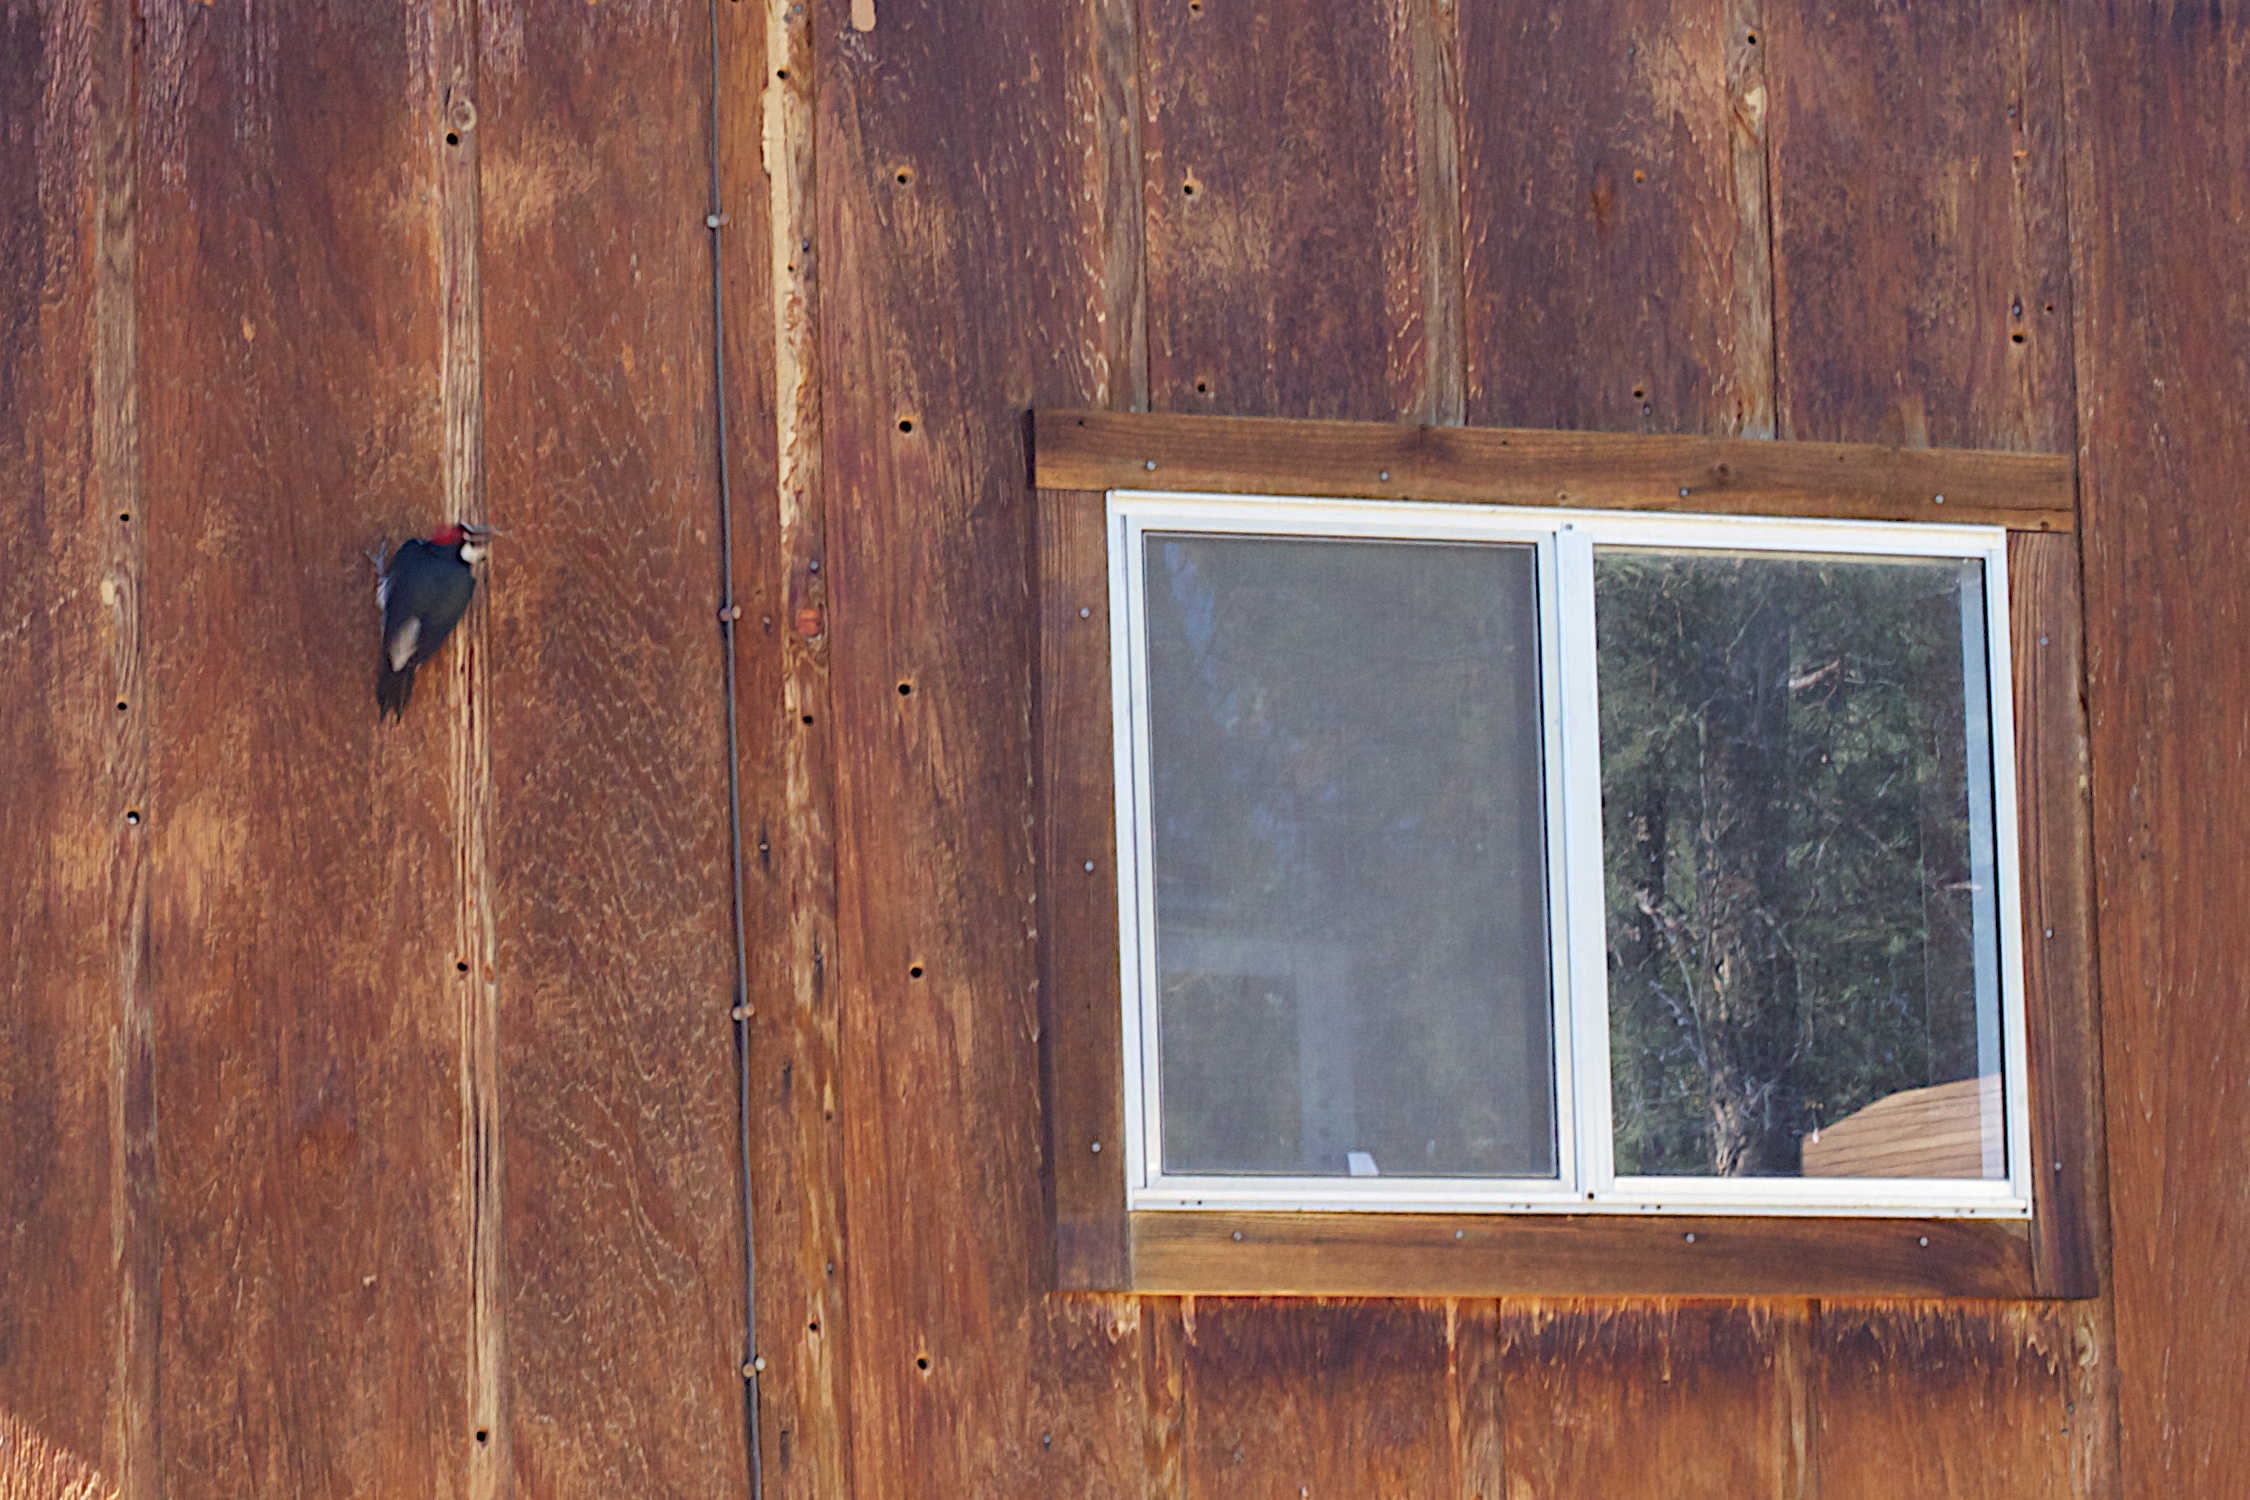 A woodpecker pecking at the side a house.